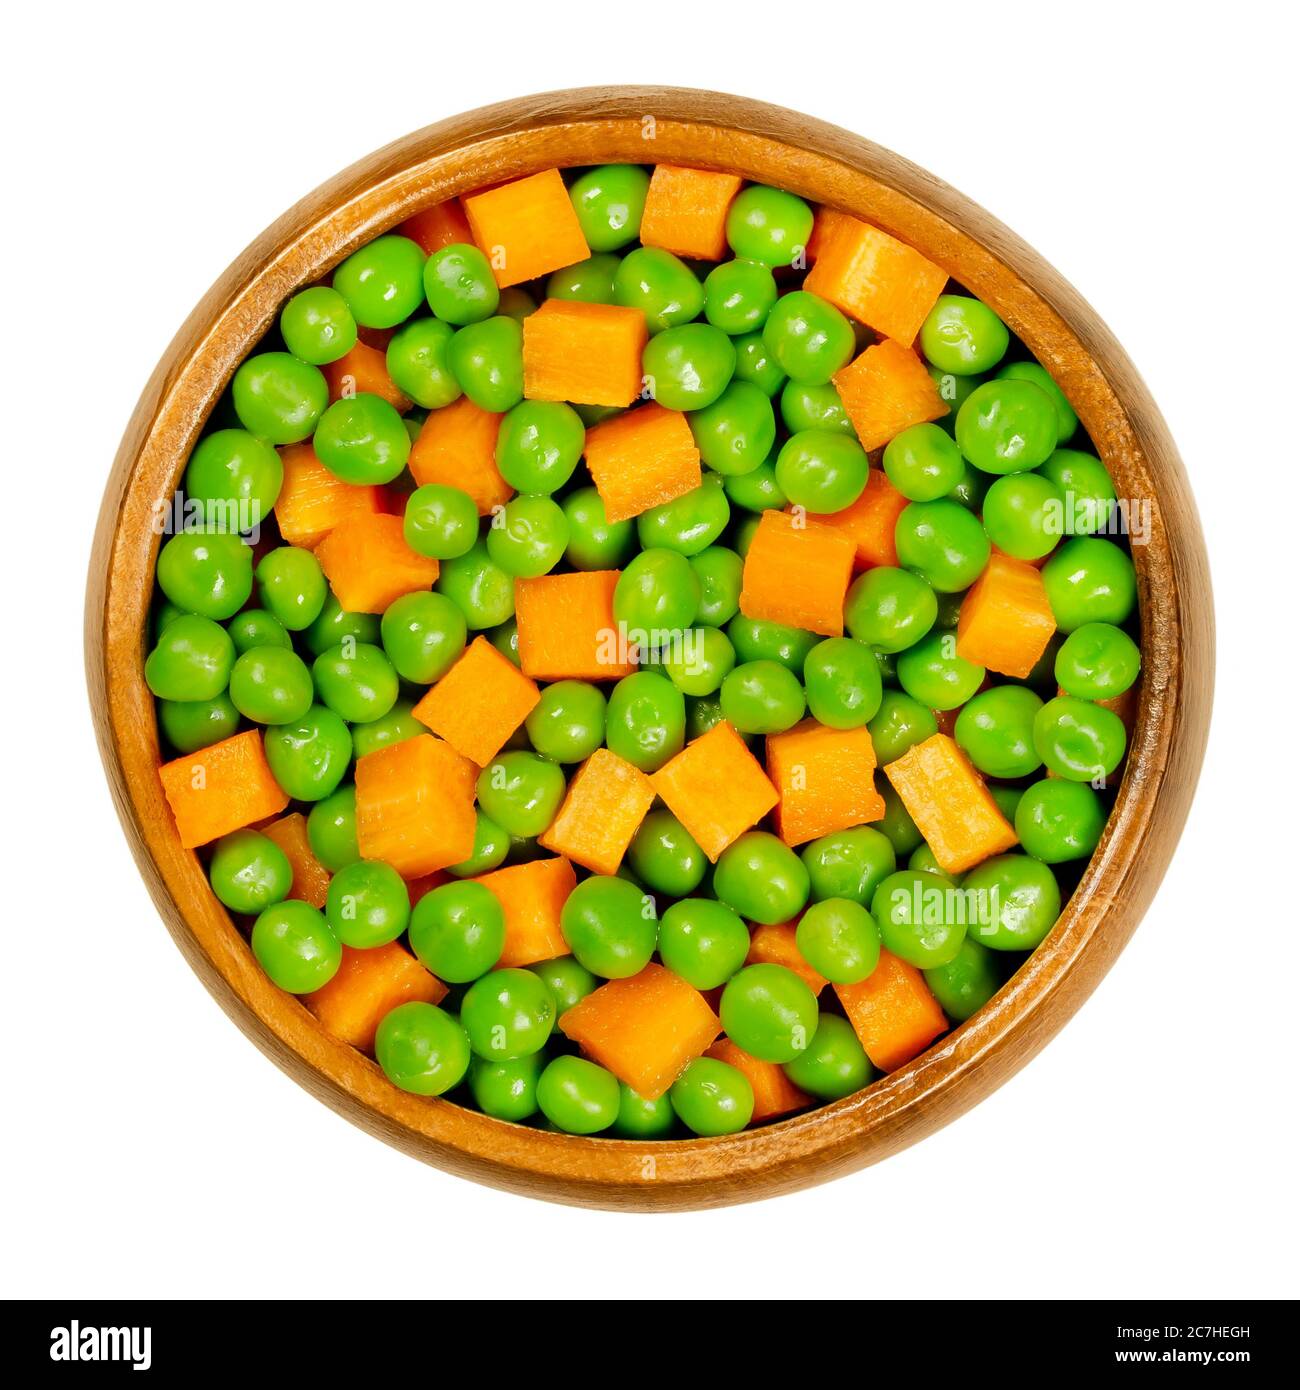 Green peas and carrot cubes in wooden bowl. Mixed vegetables. Seeds of pod fruit Pisum sativum and orange colored cubes of carrots, Daucus carota. Stock Photo